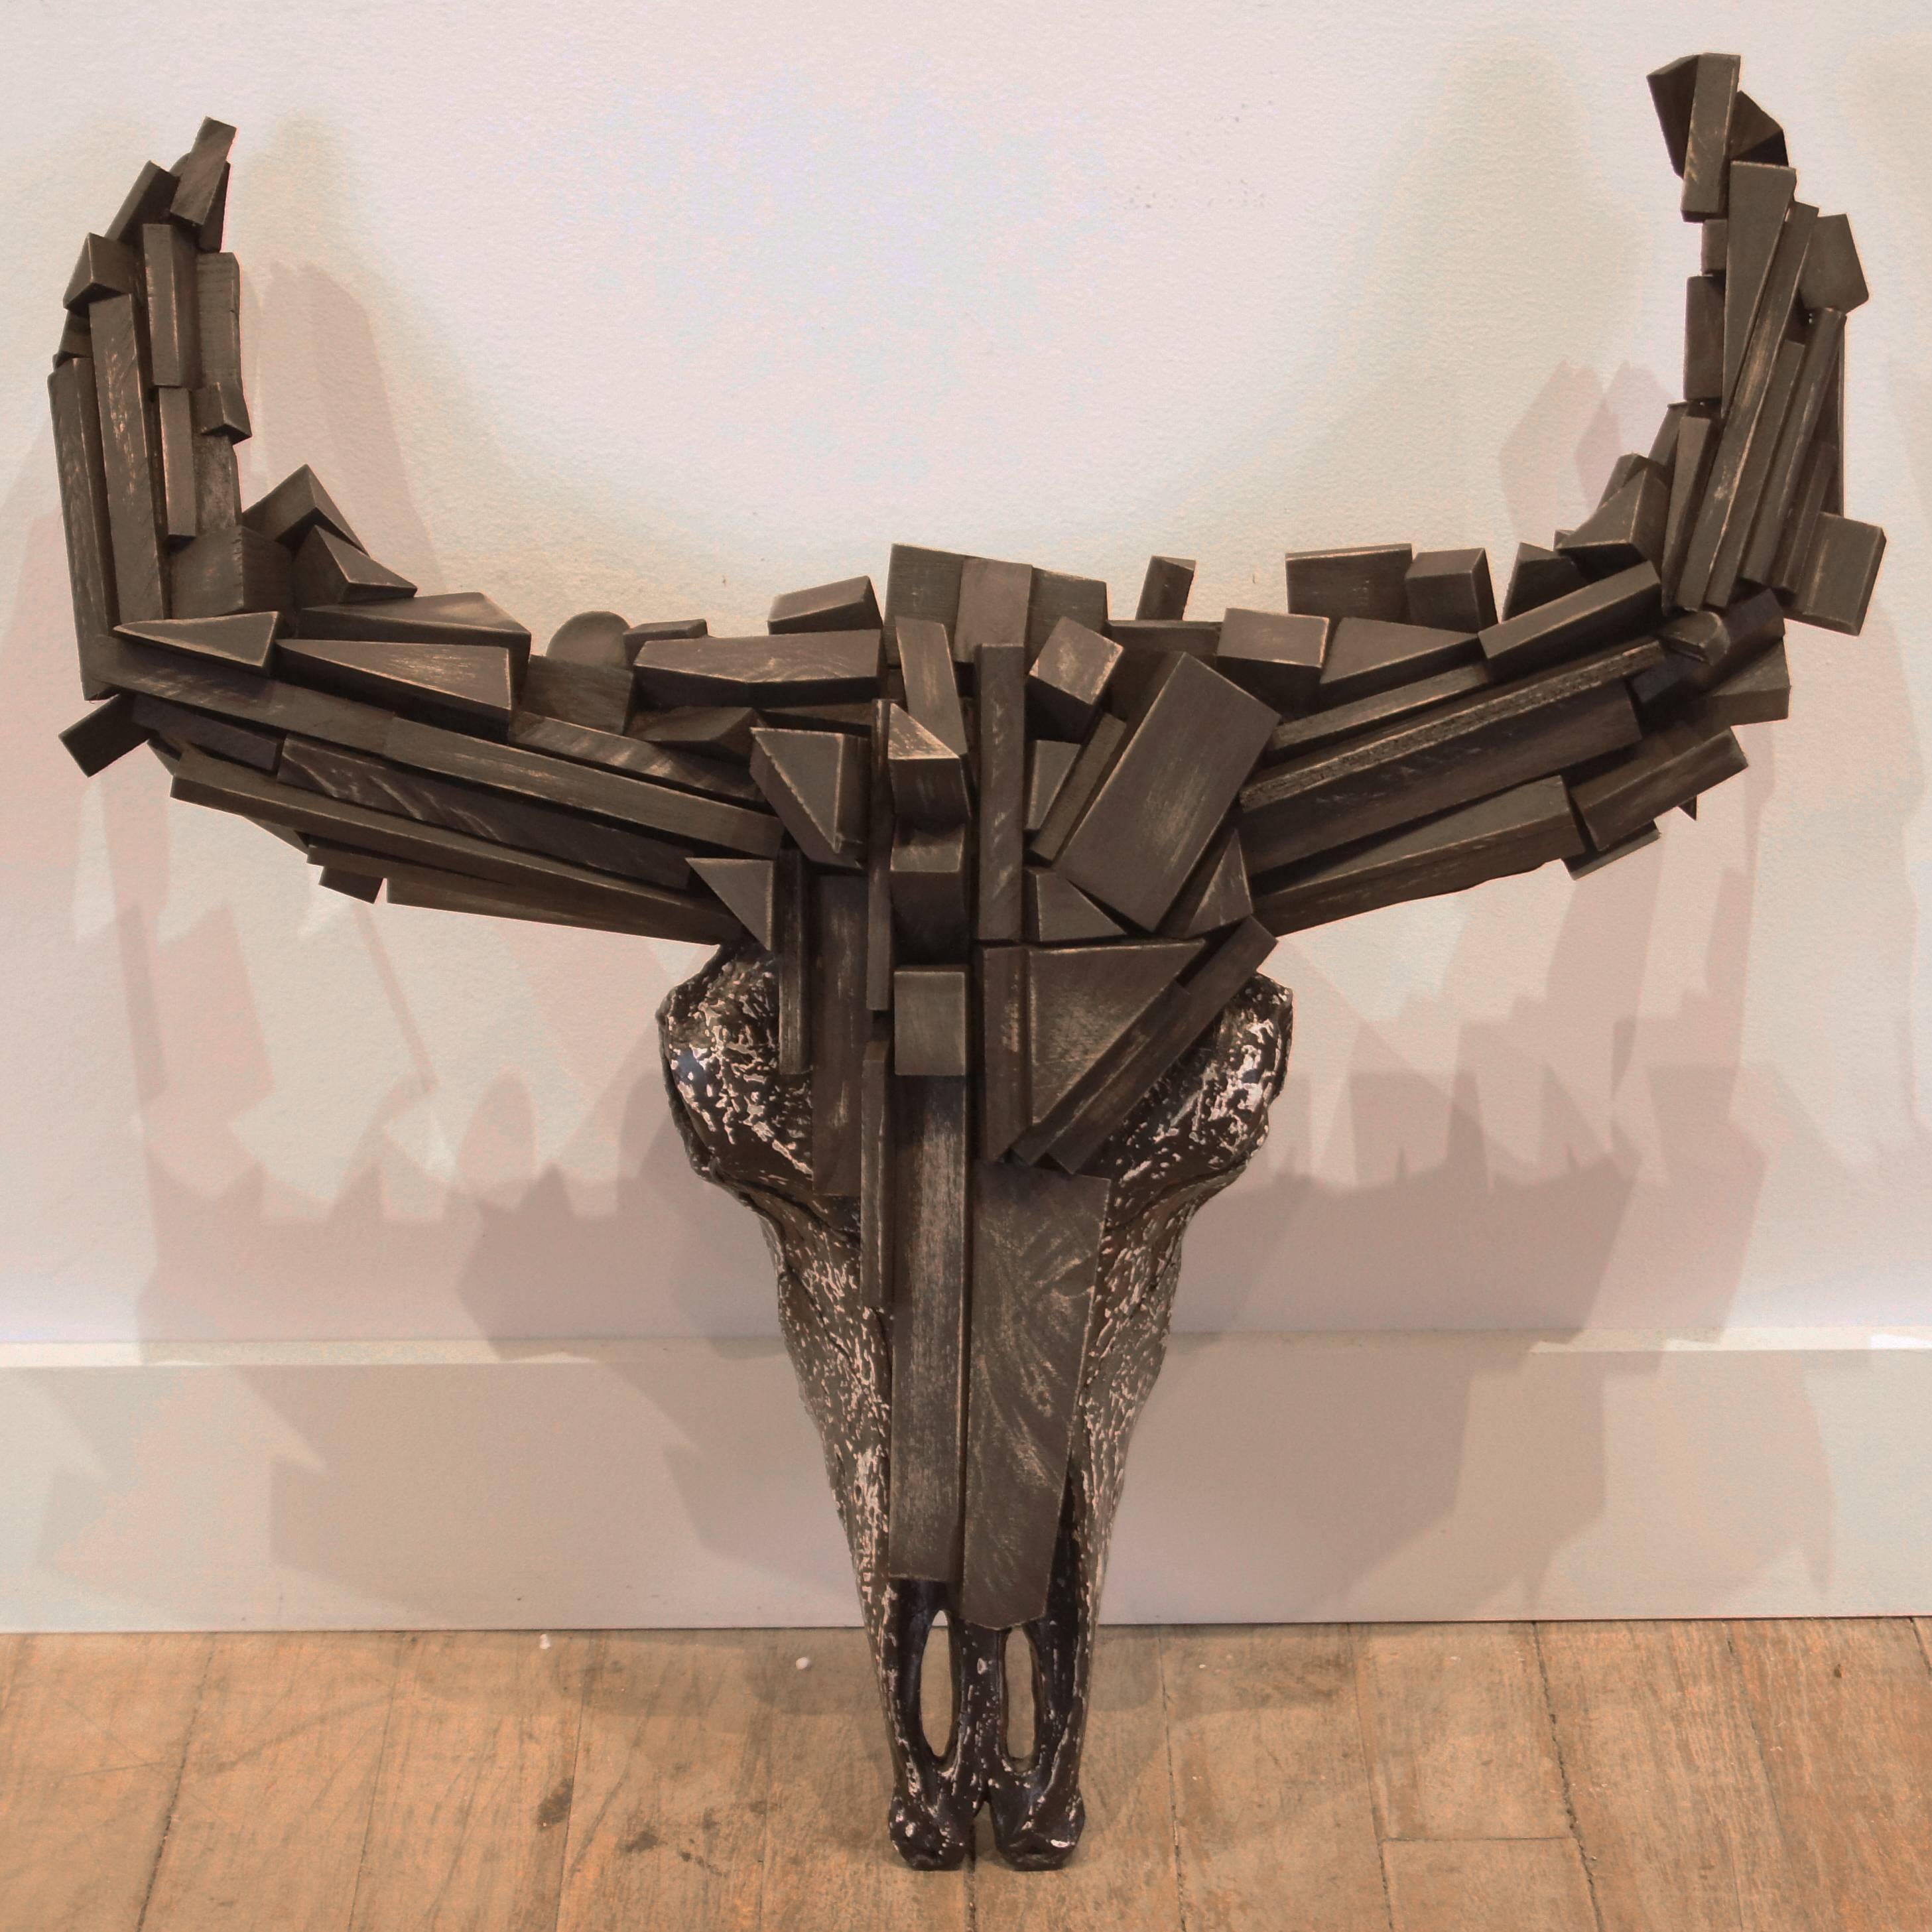 Faux Bison Skull in Resin with Wood-Piece Horns and Painted Texture - Expressionist Sculpture by David LeCheminant